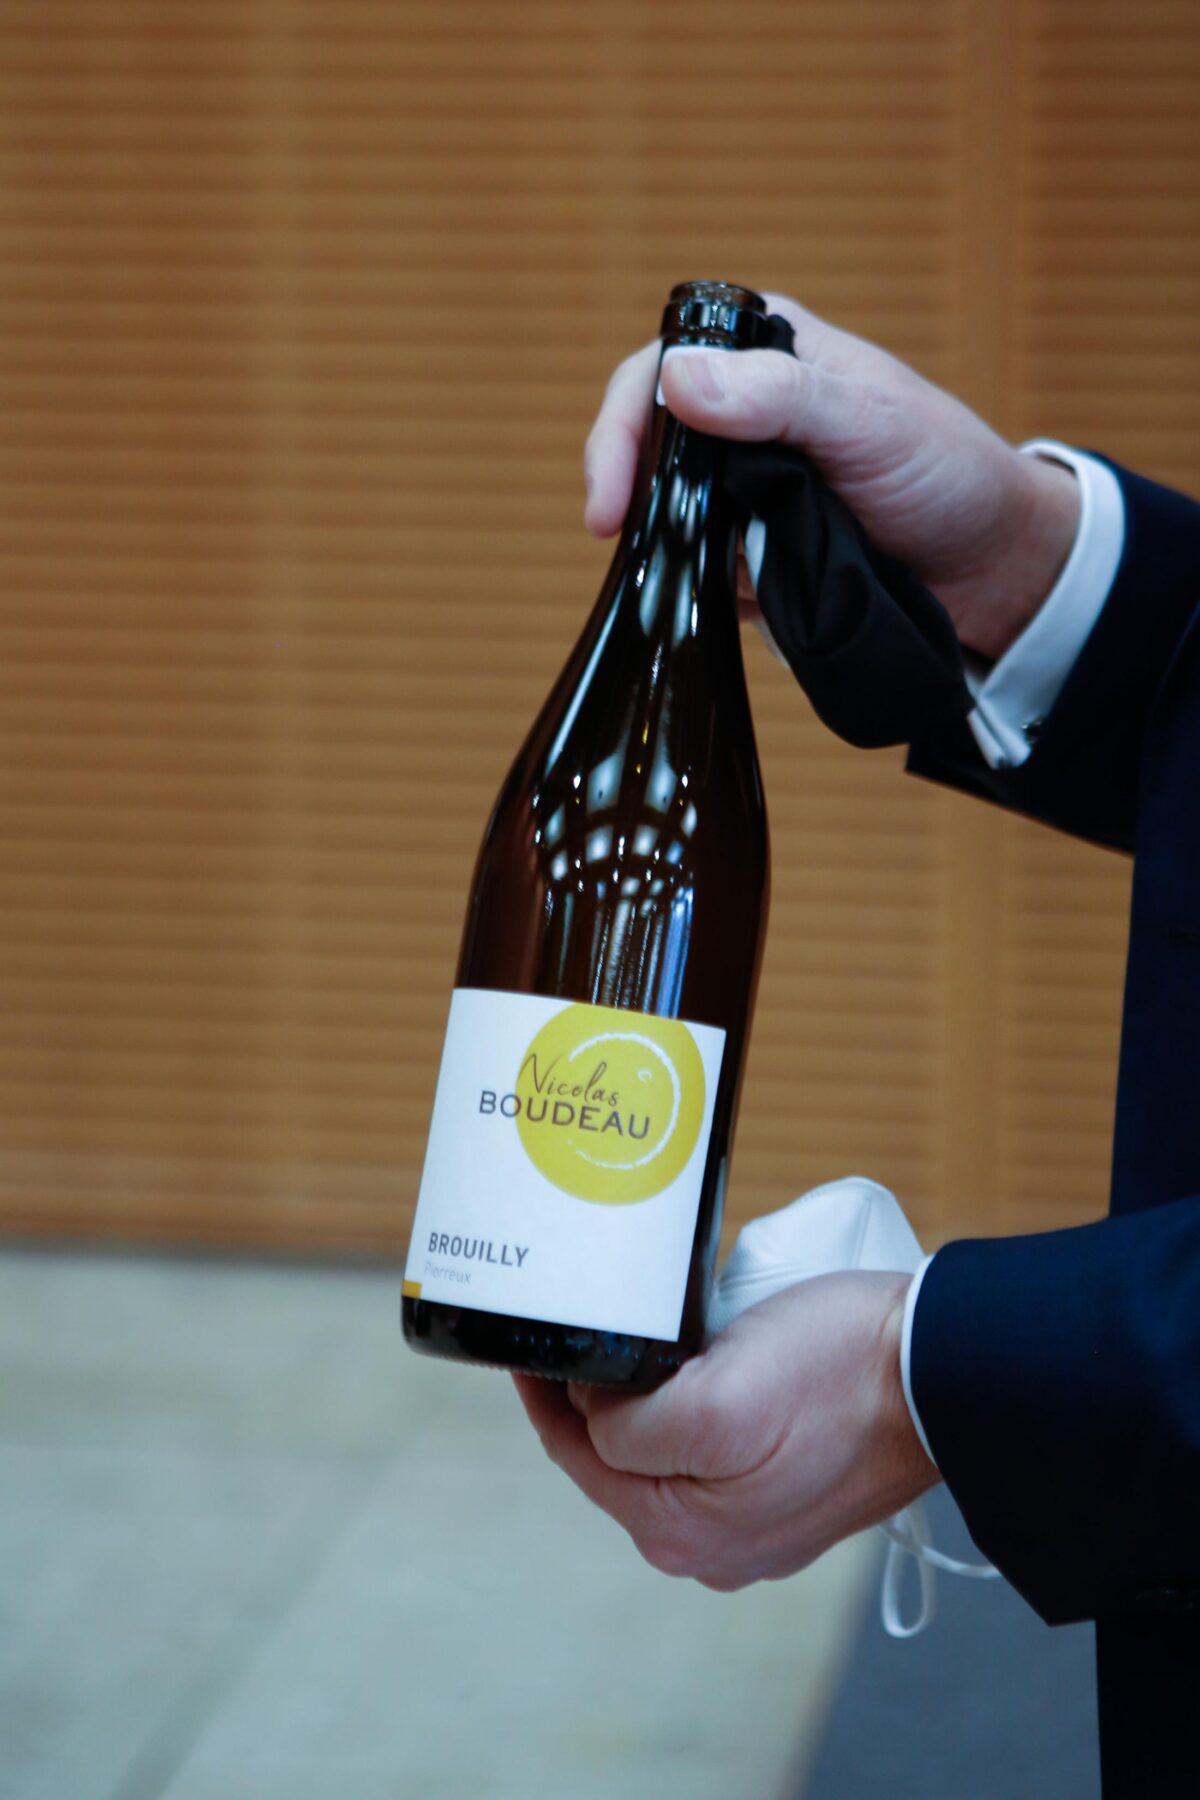 Brouilly – Pierreux 2020 from Domaine Nicolas Boudeau Awarded World’s Best Gamay 2022!